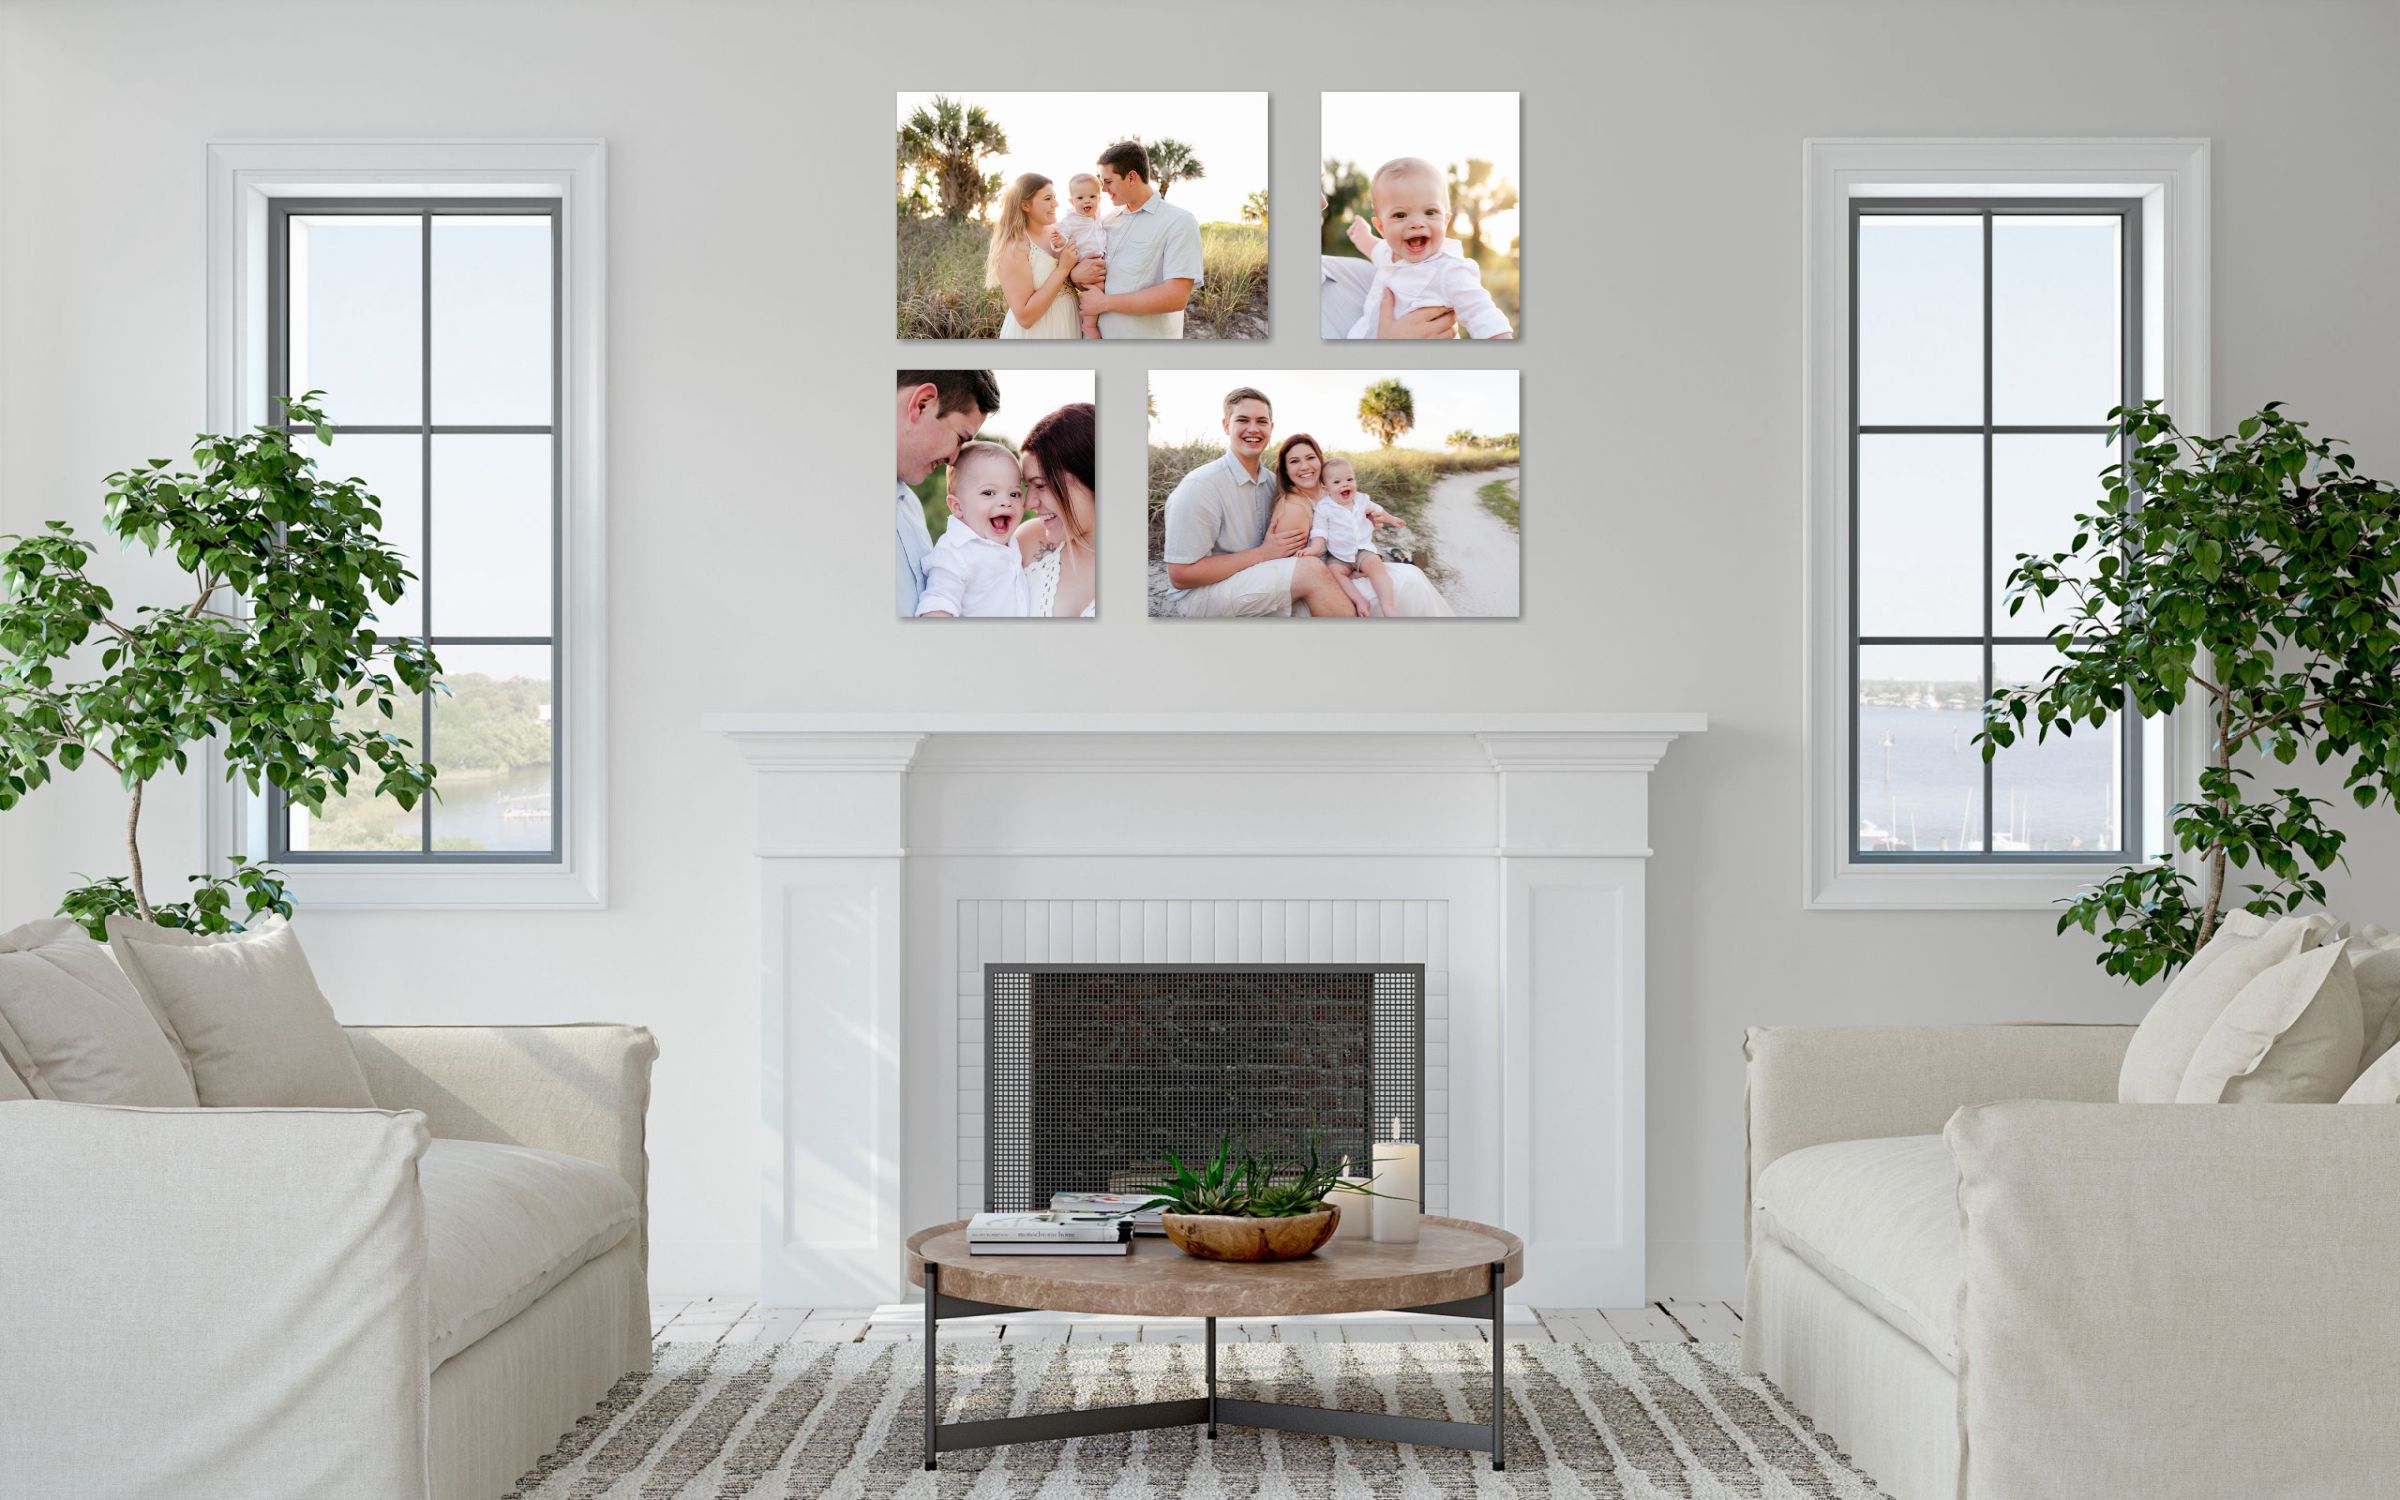 Printed Images on living room wall 